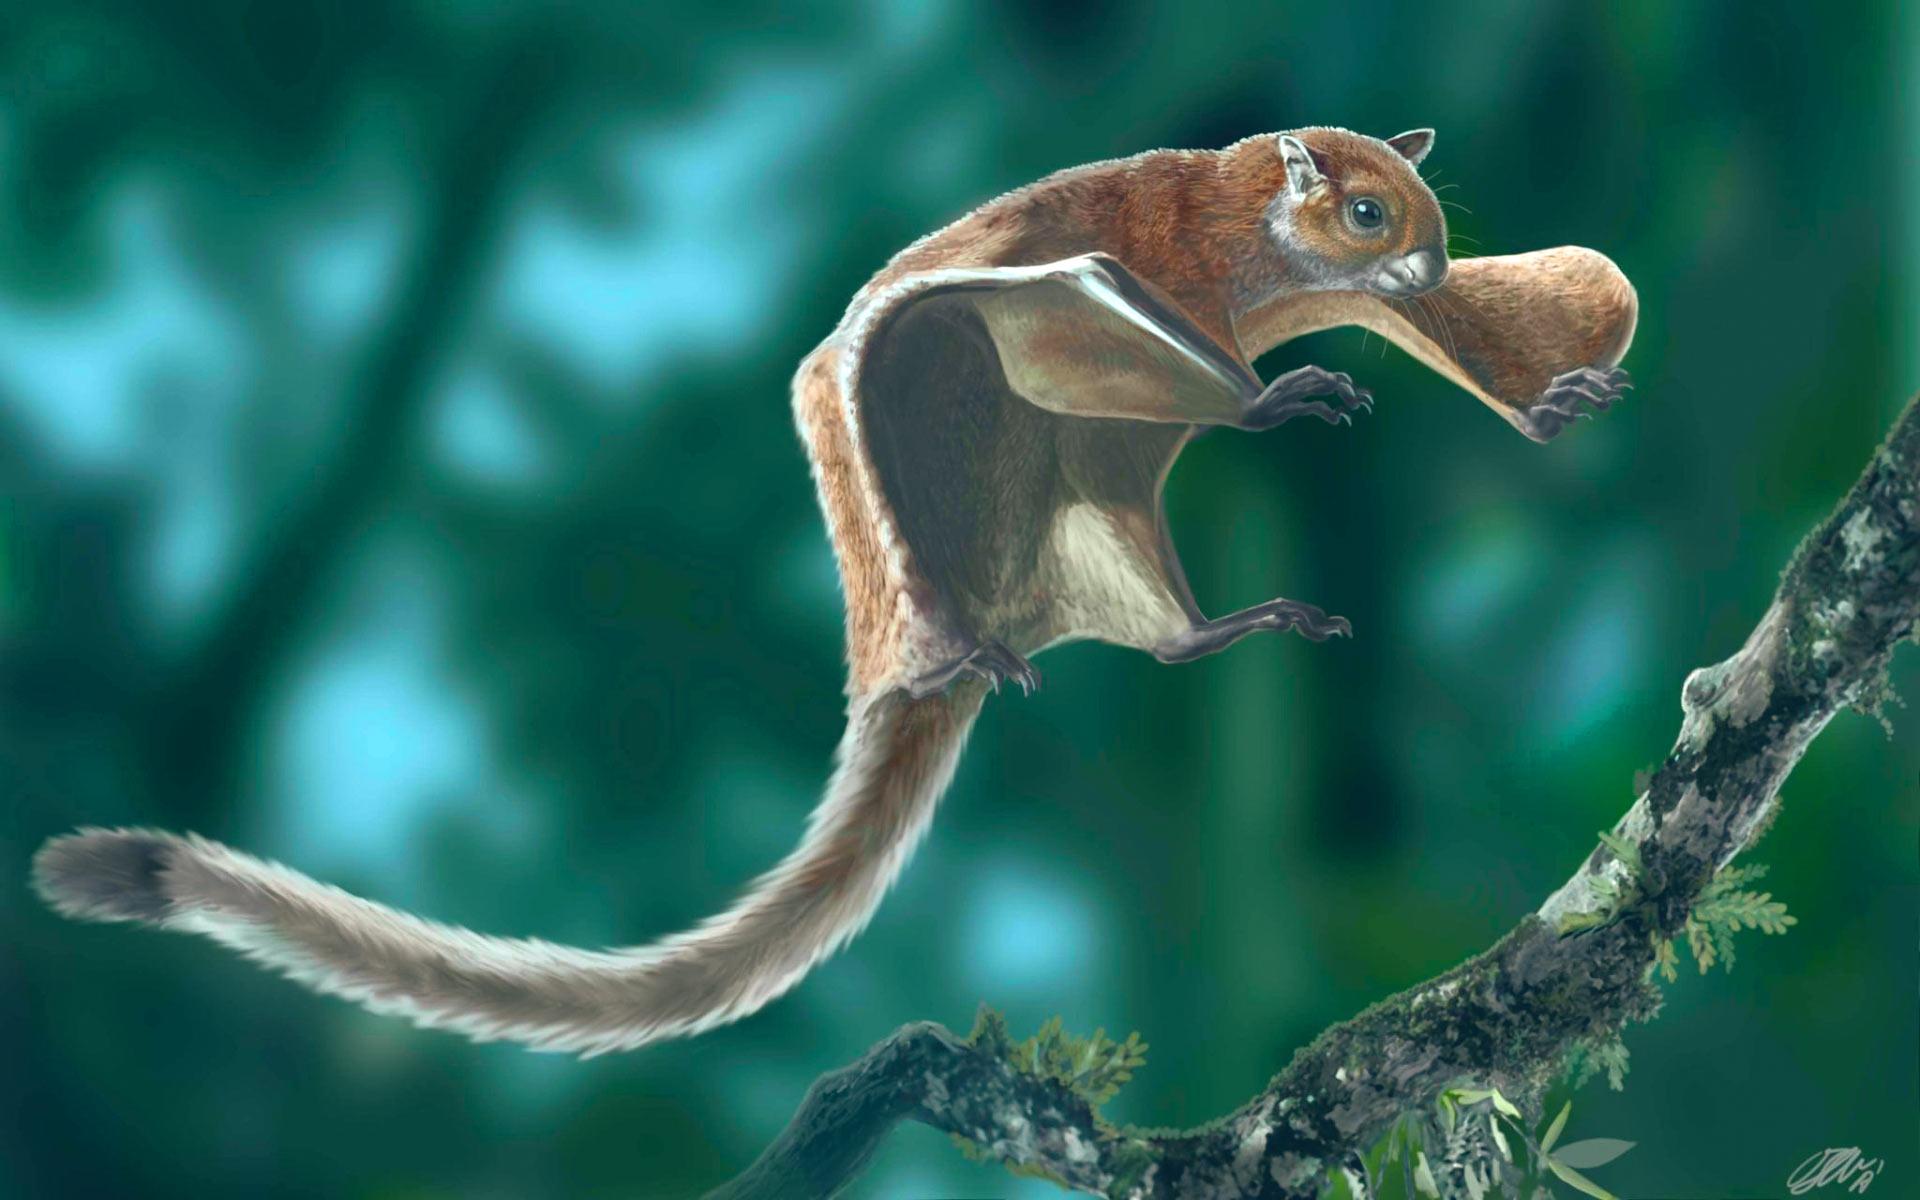 World's Oldest Flying Squirrel Fossil Discovered